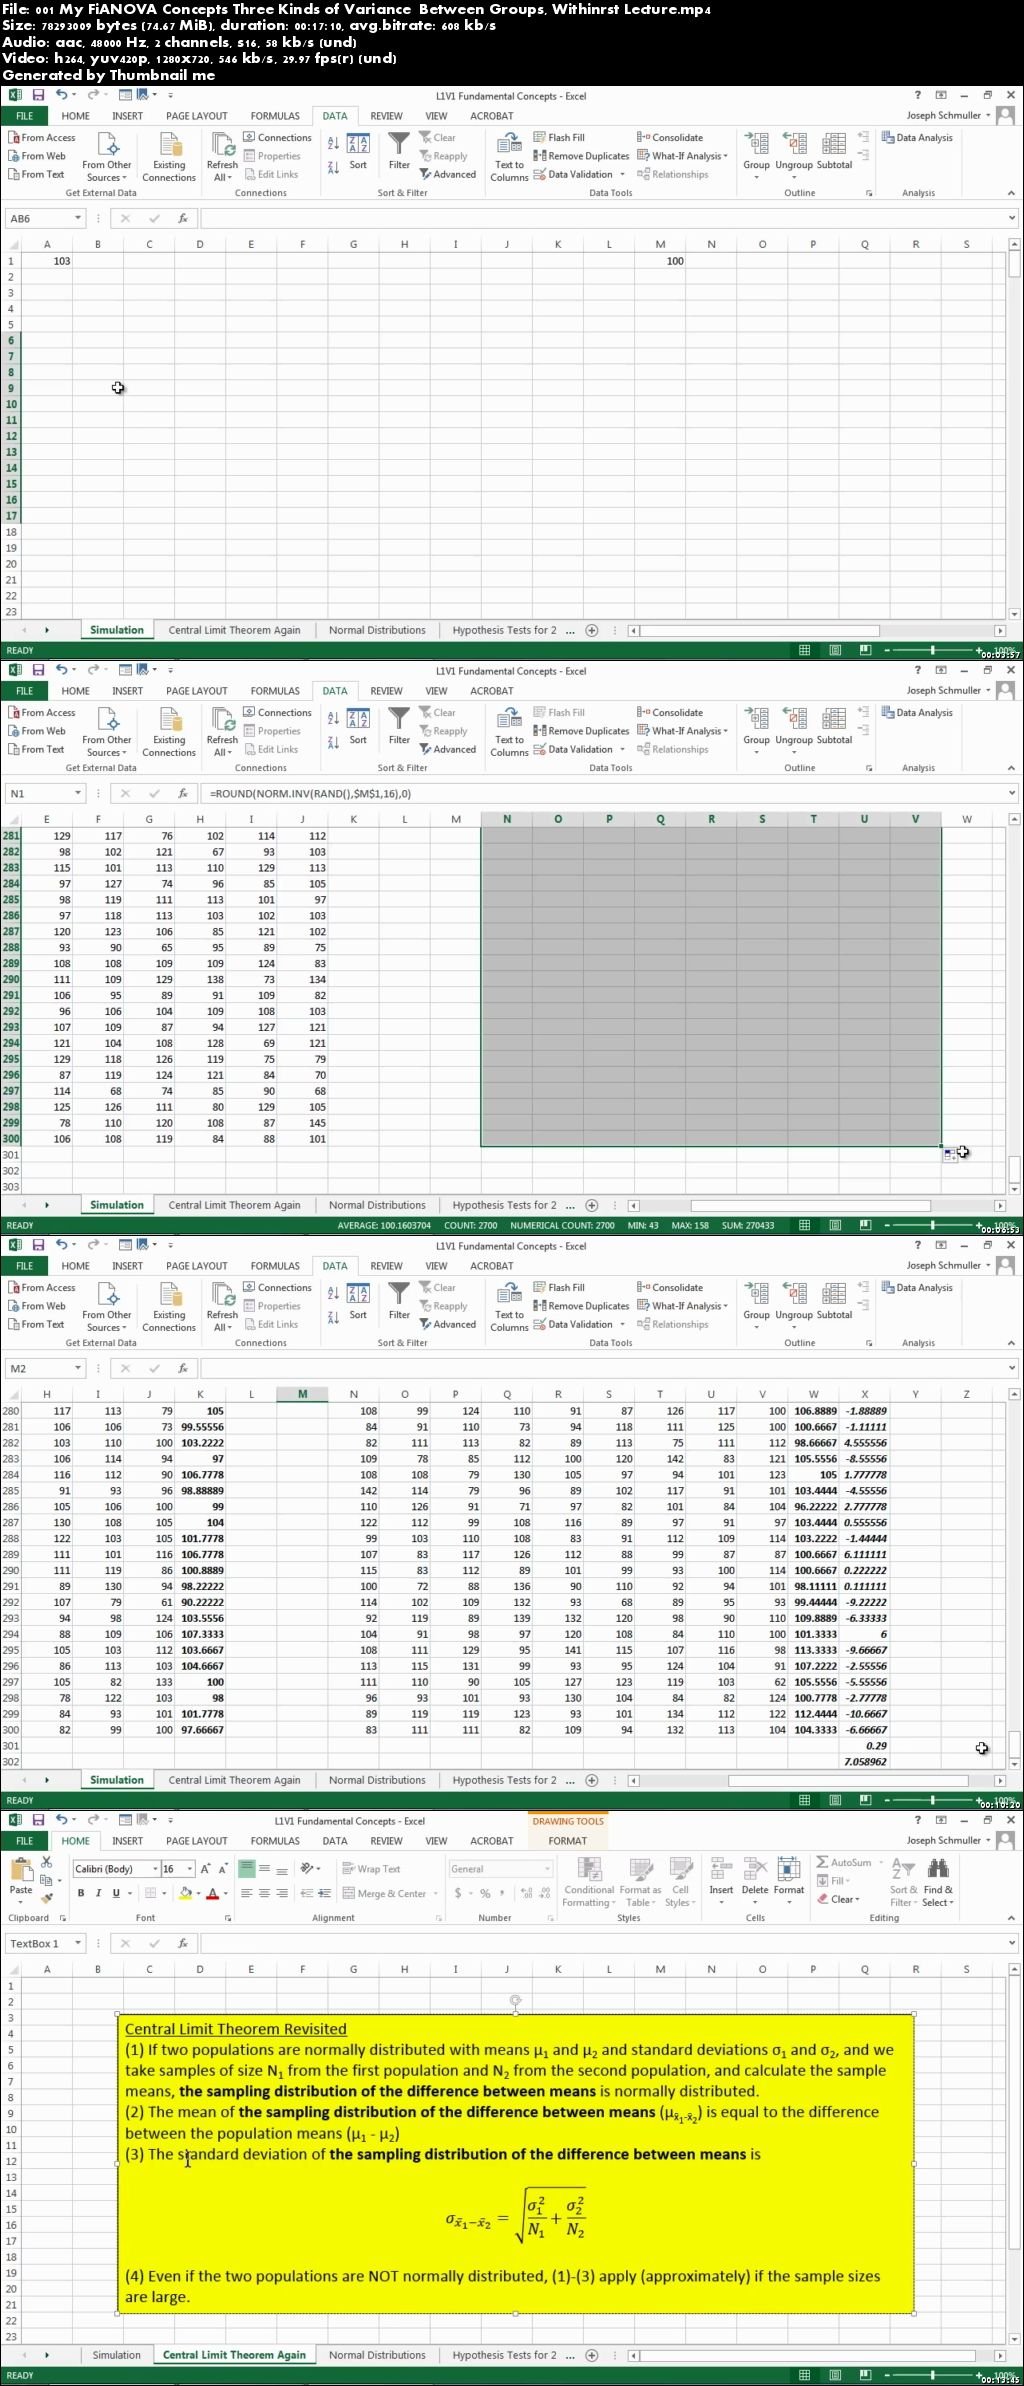 download data analysis excel 2013